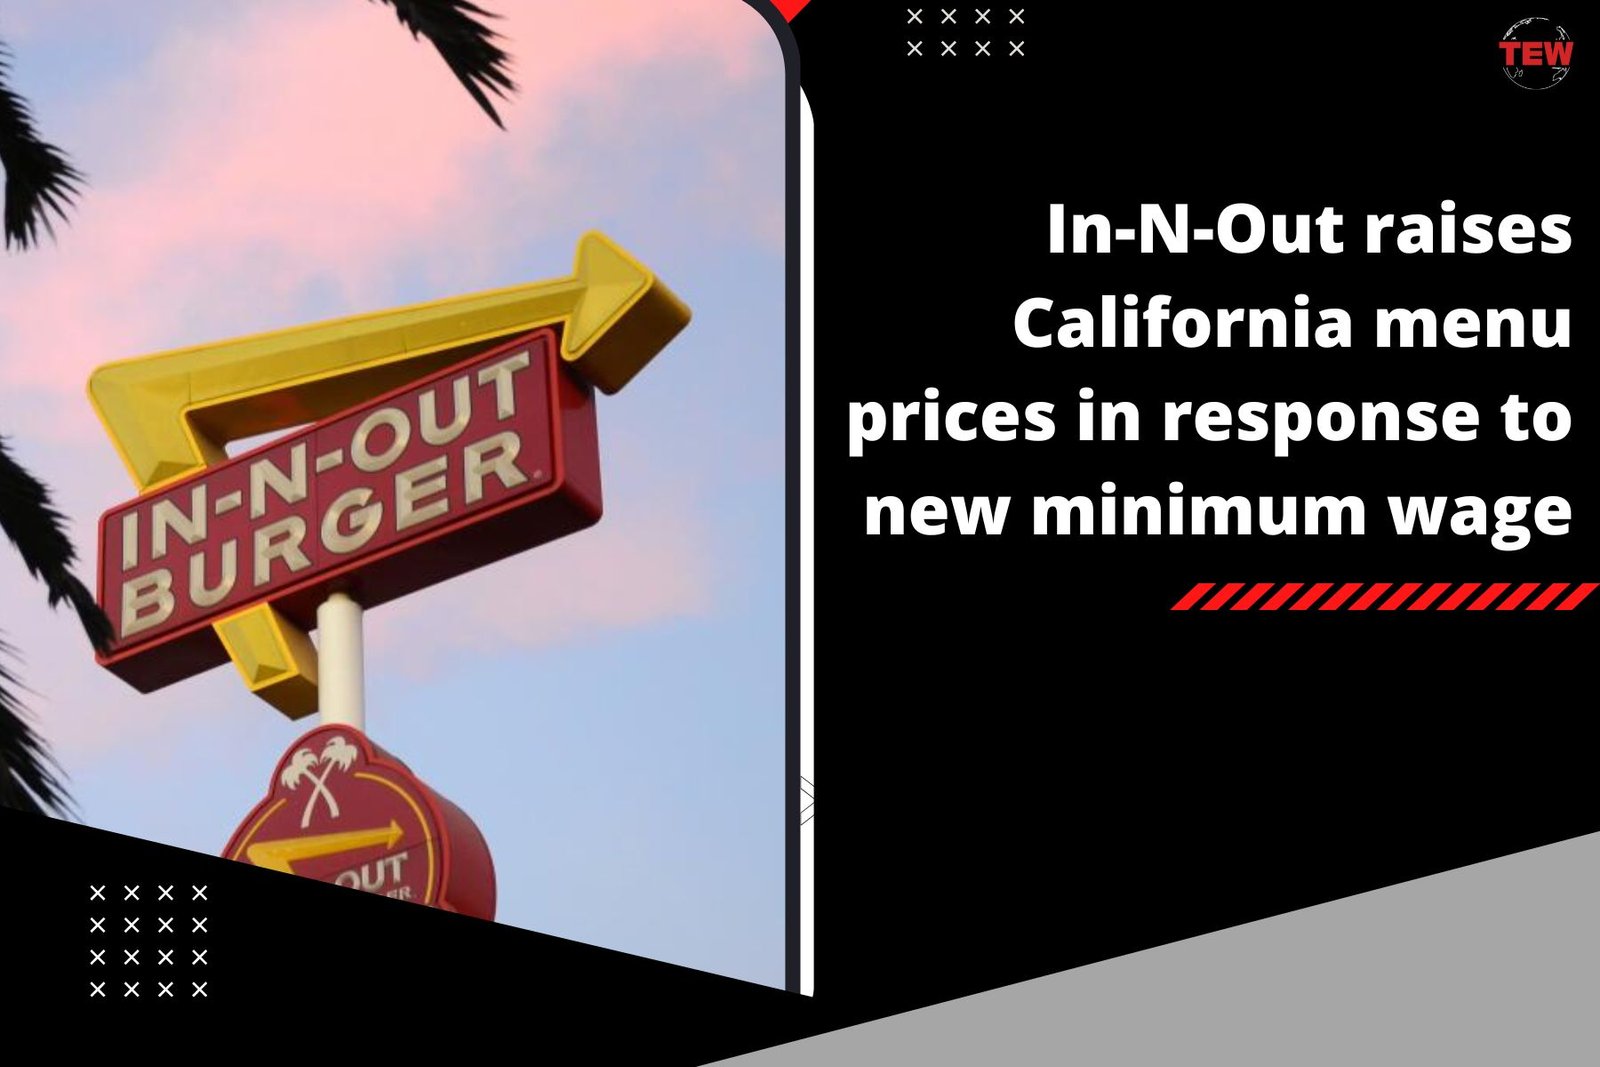 In-N-Out Raises California Menu Prices in Response to New Minimum Wage